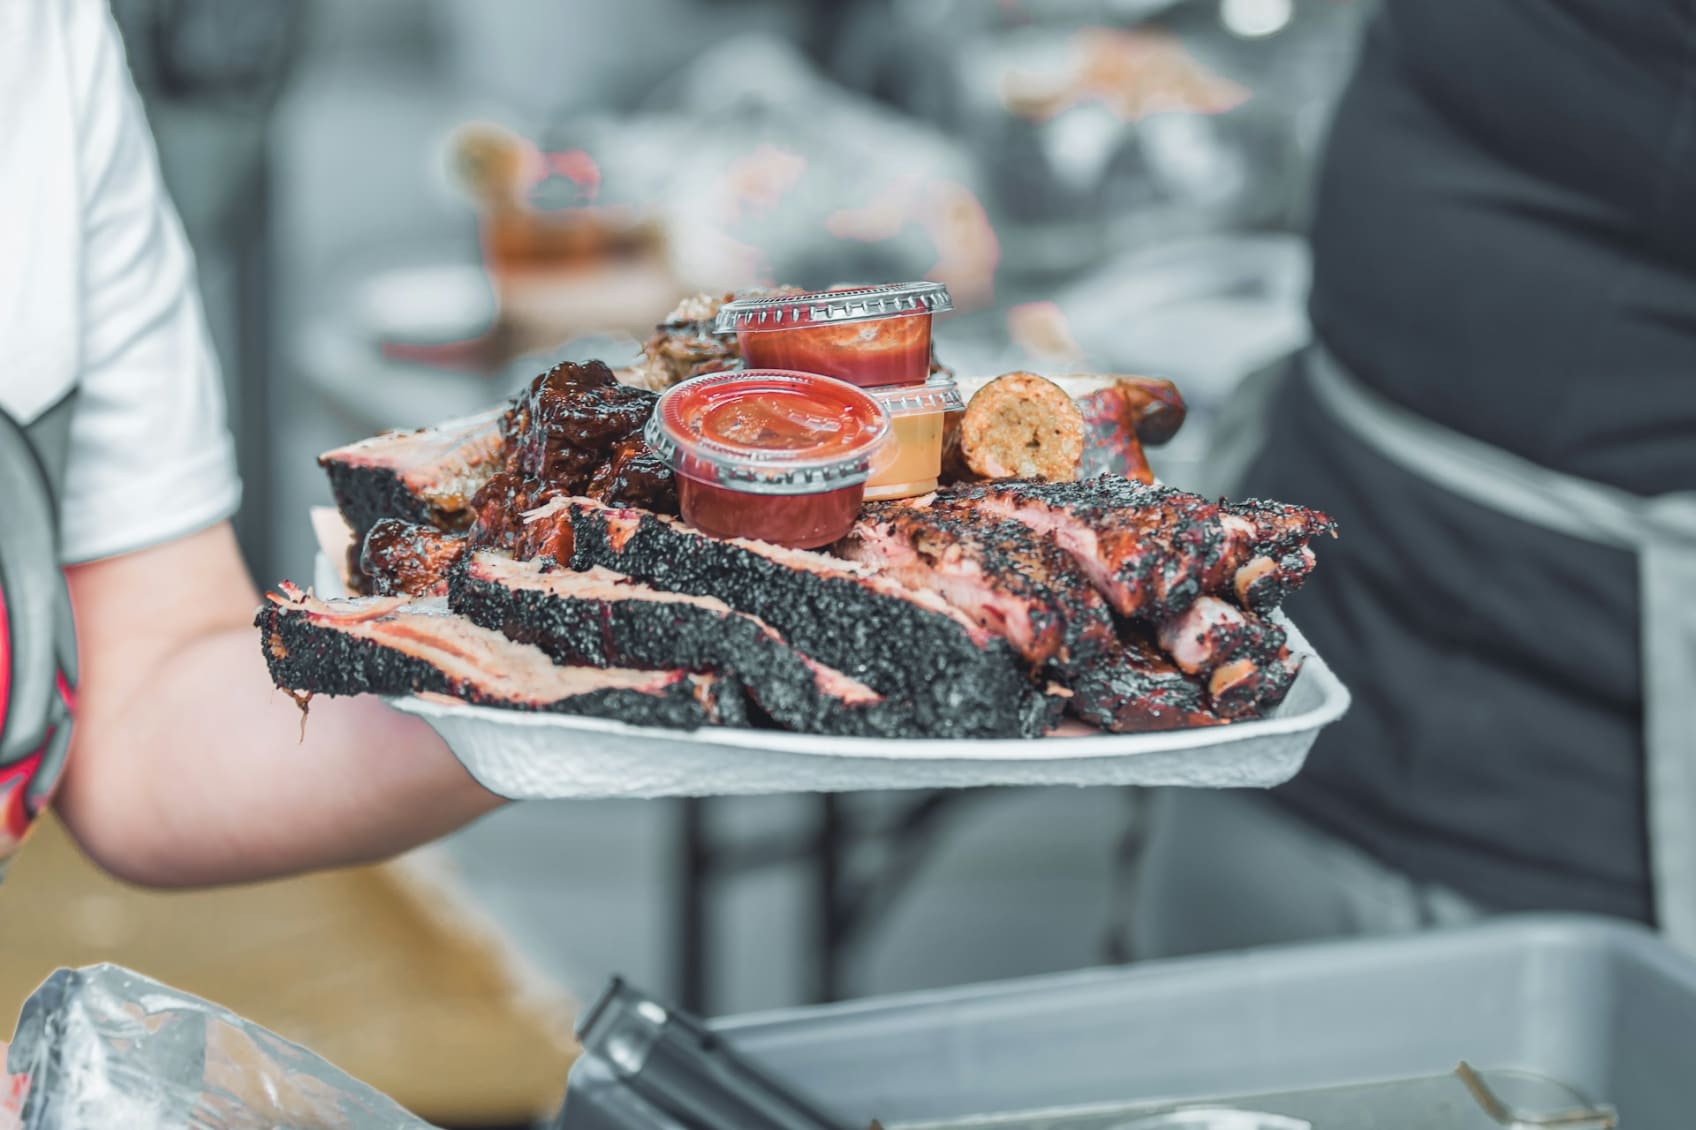 A photo of a platter of barbecue.